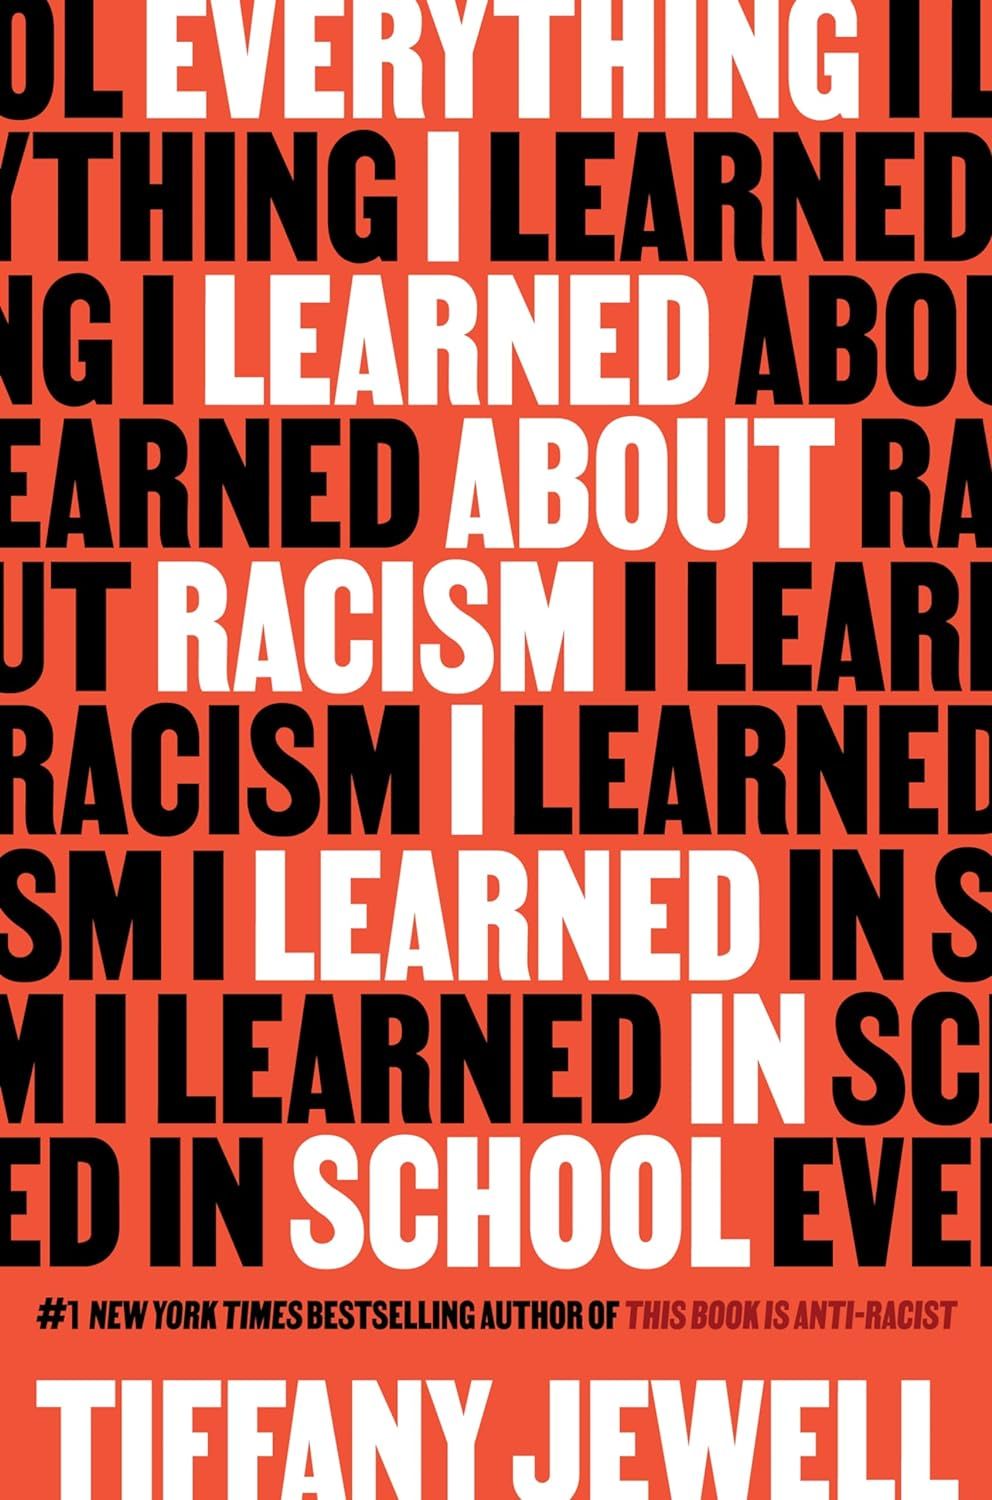 Everything I Learned About racism I Learned in School cover